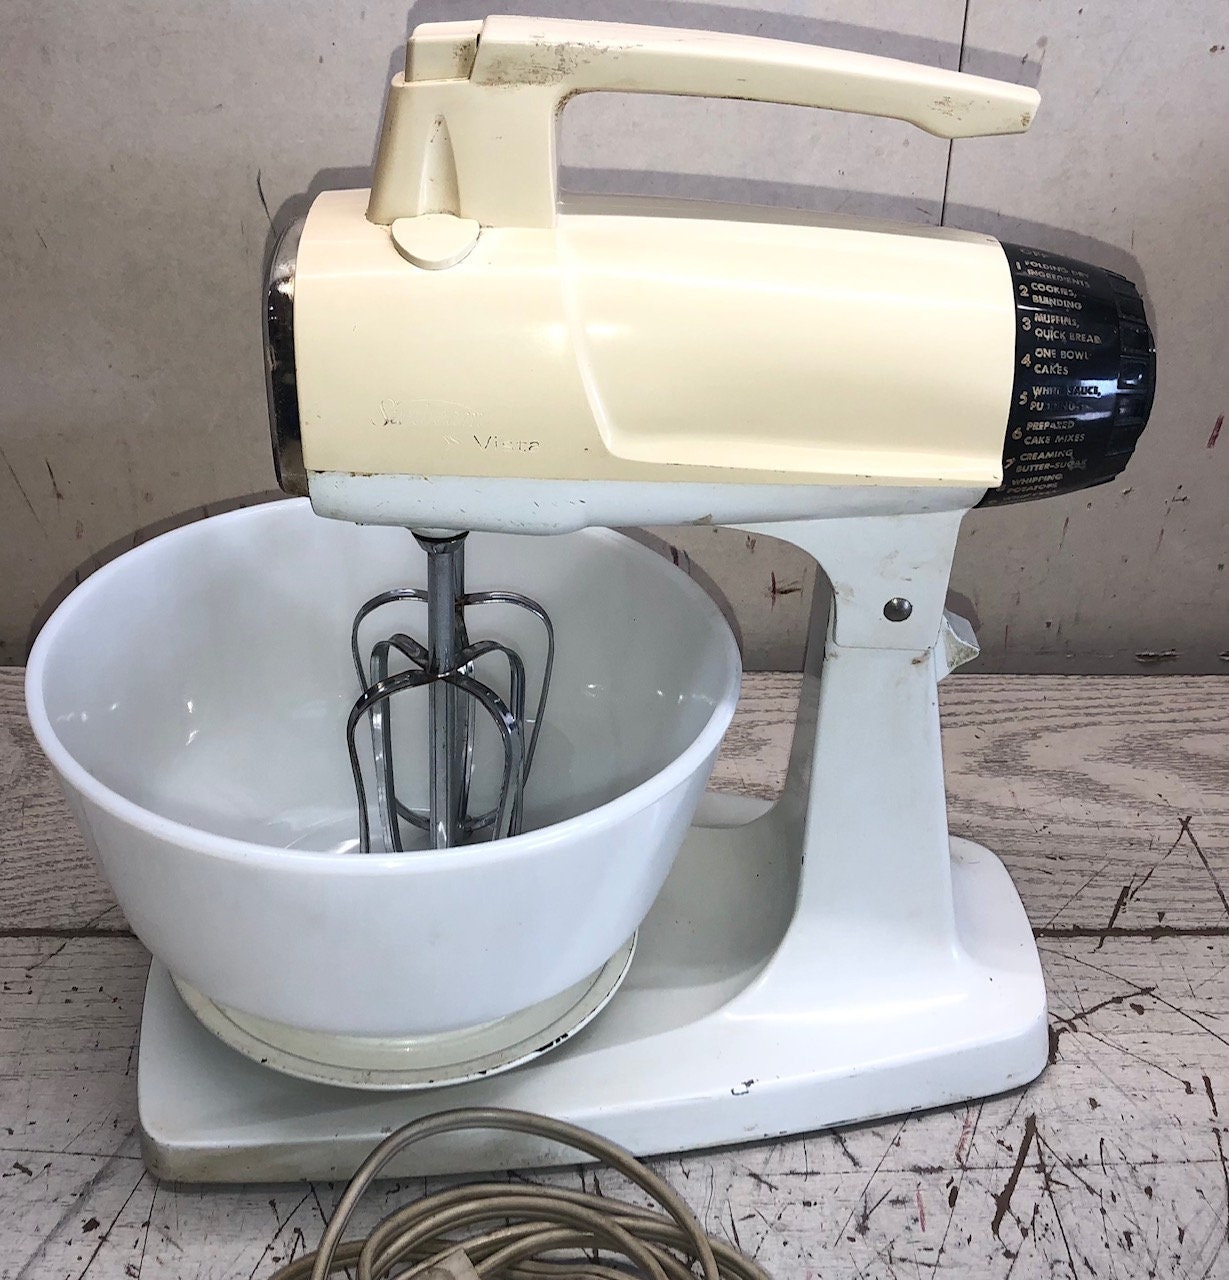 Sunbeam Mixer Parts - Sunbeam Whisks, Beaters, Bowls and More